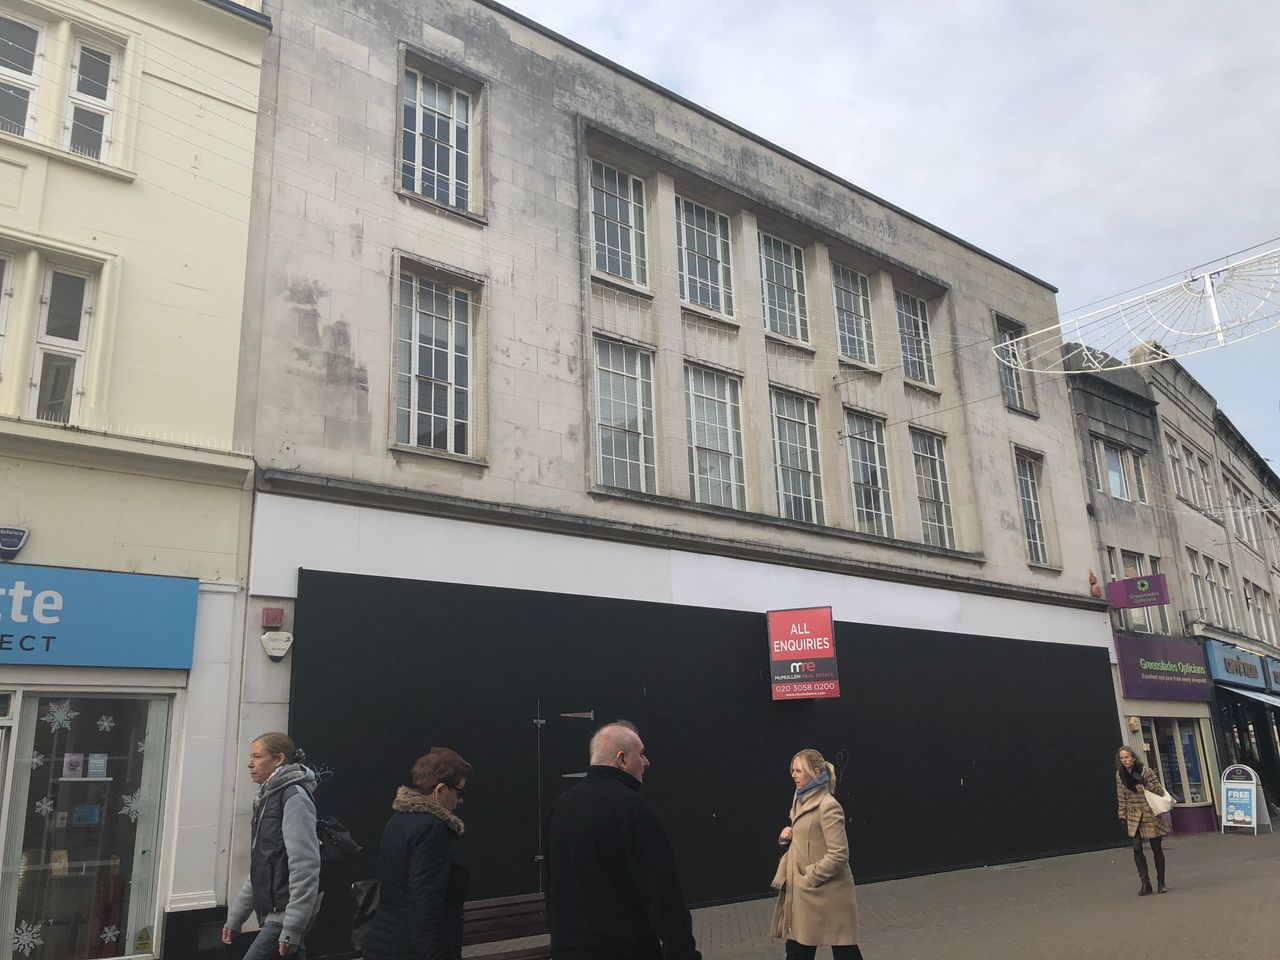 The former Marks & Spencer building, which the retail giant left in April 2019.